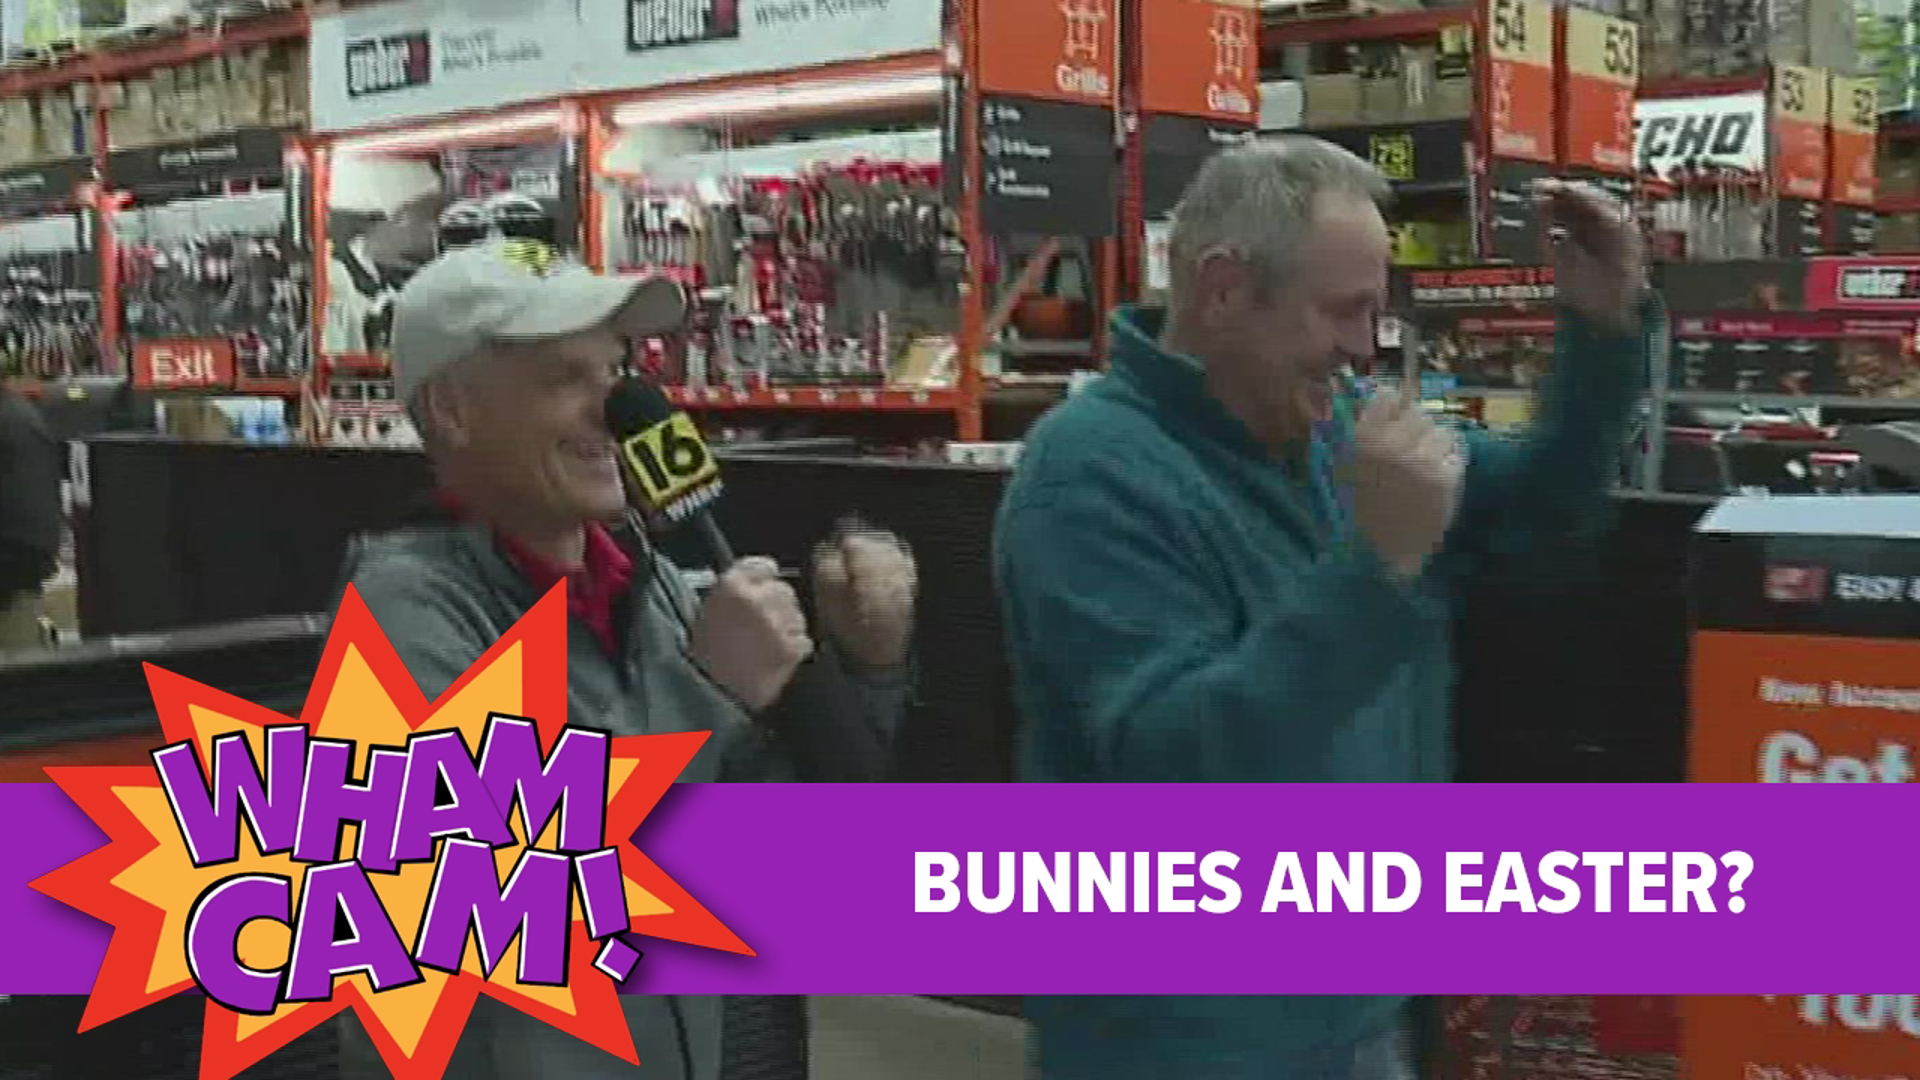 Joe Snedeker heads to Lowes in Dickson City to find out if anyone knows about the connection between Easter and bunnies.